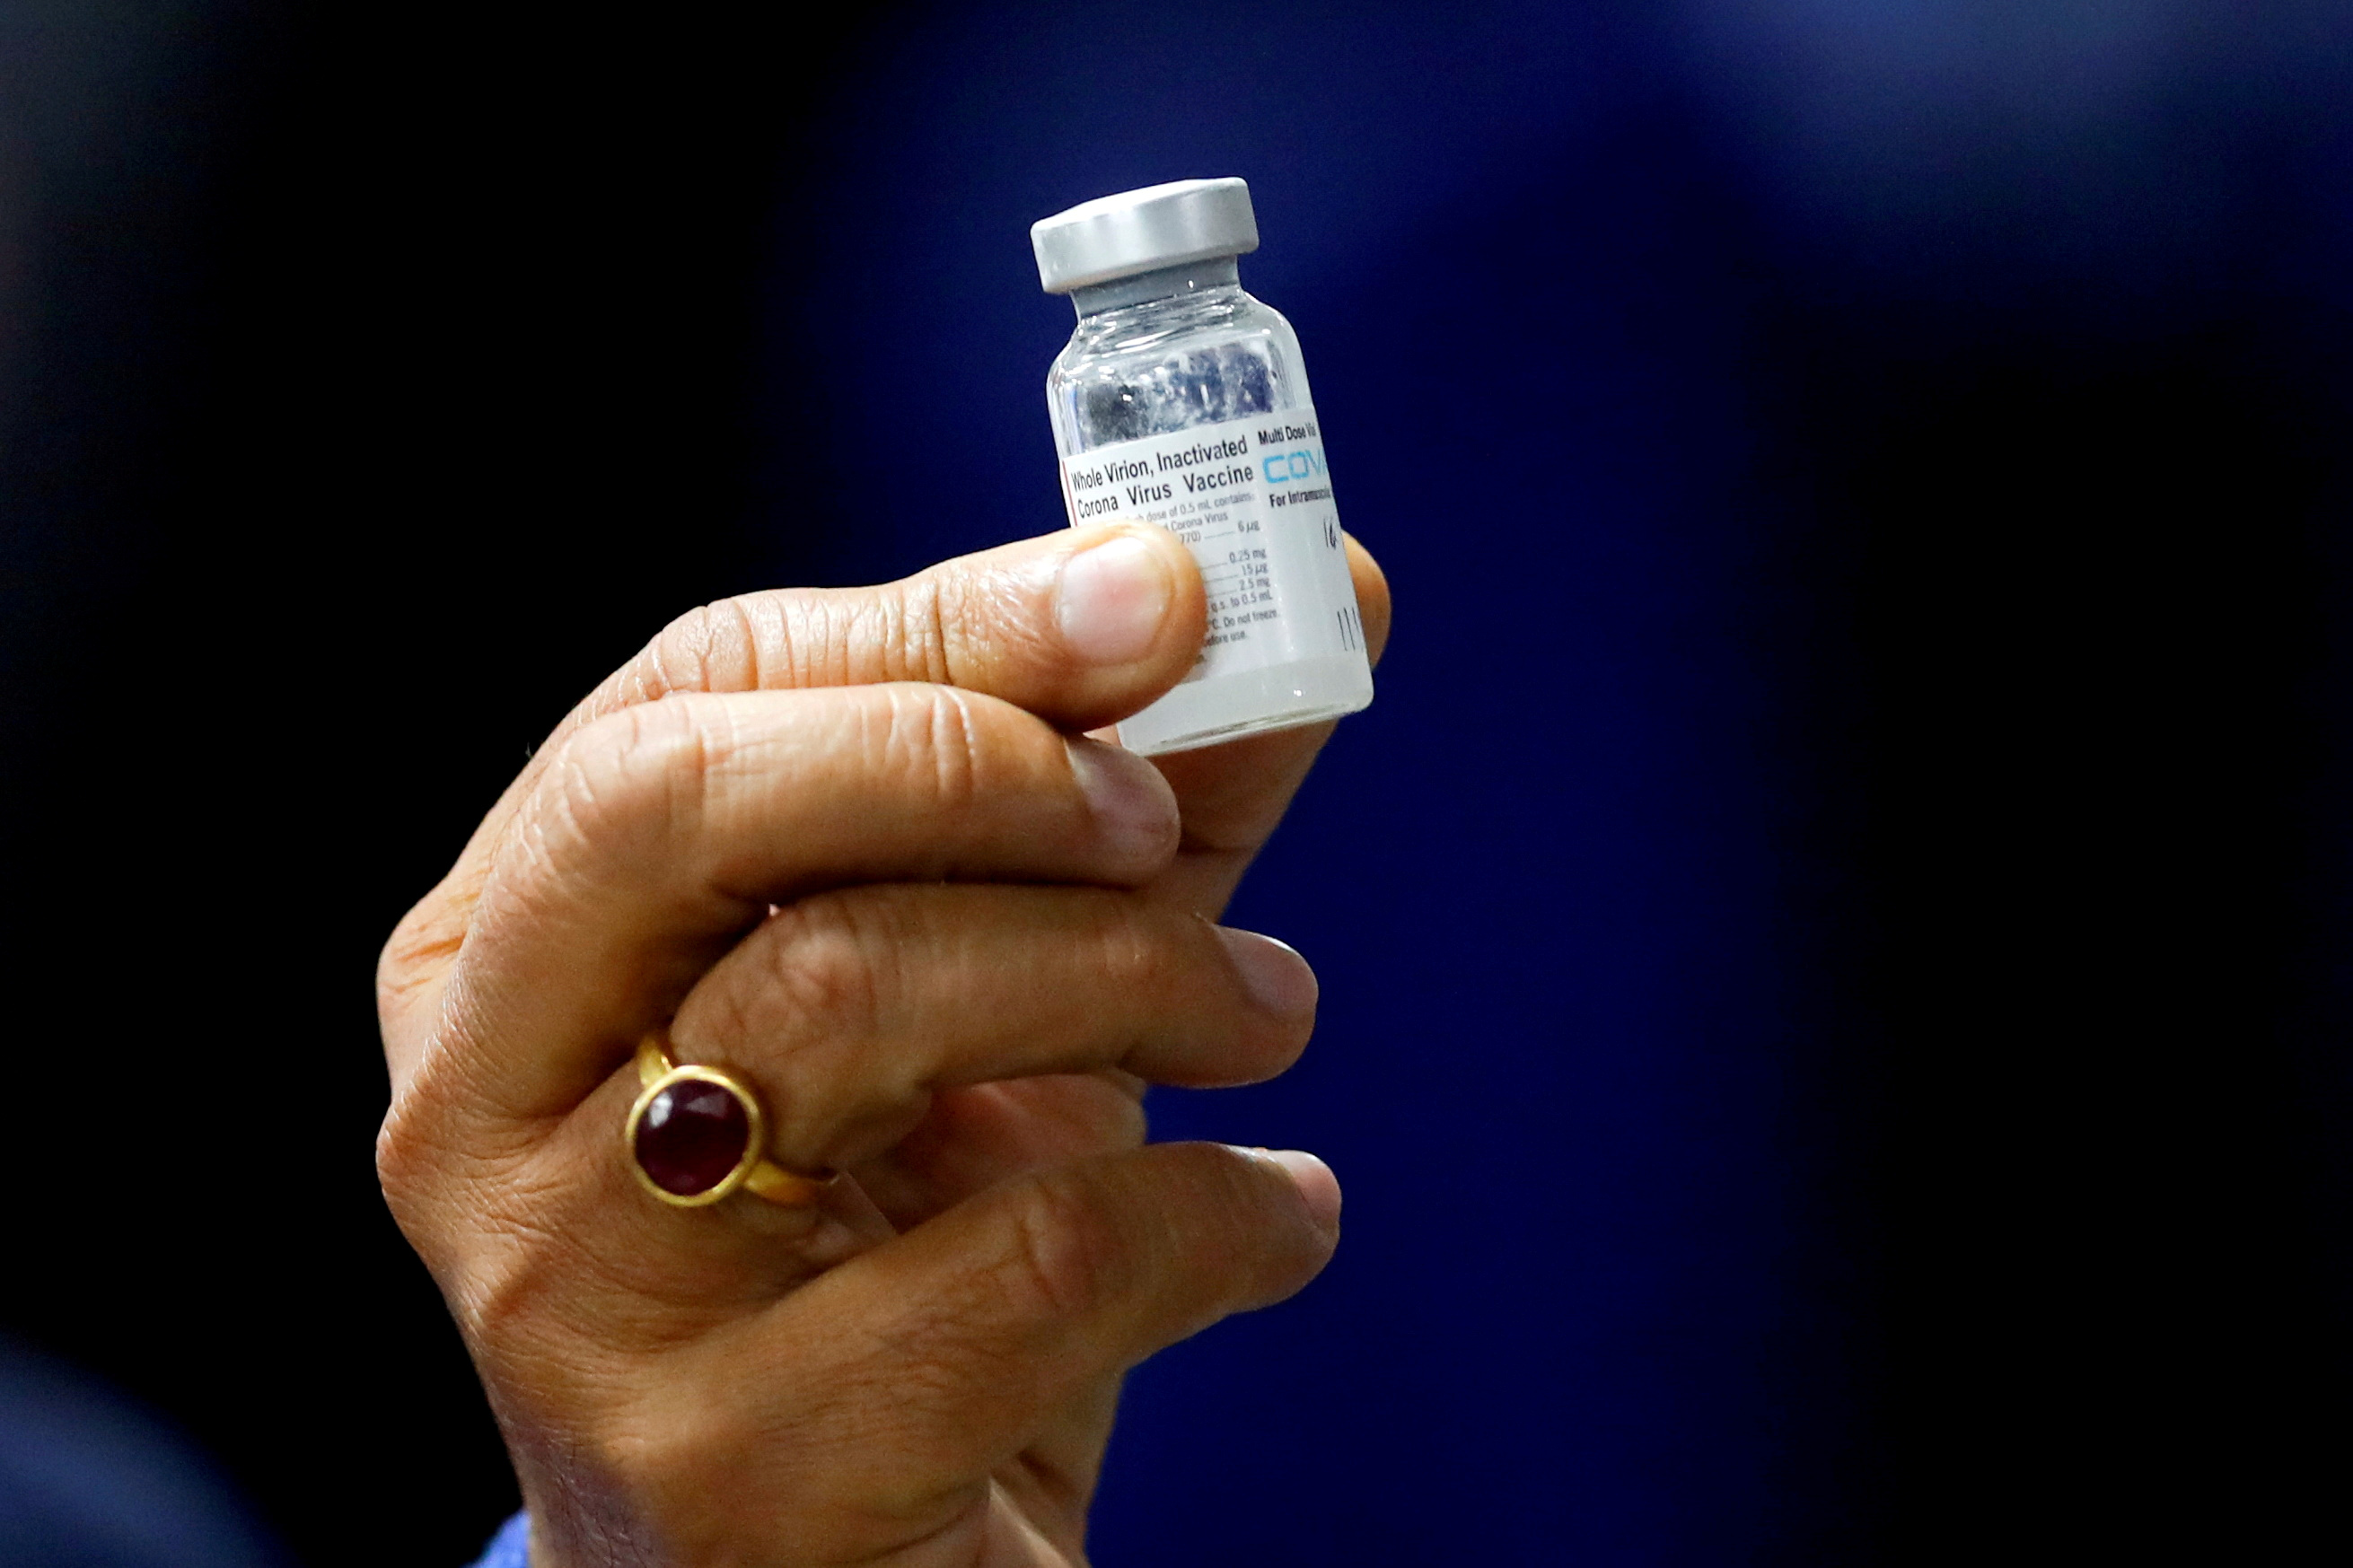 Indian Health Minister Harsh Vardhan holds a dose of Bharat Biotech's COVID-19 vaccine called COVAXIN, during a vaccination campaign at All India Institute of Medical Sciences (AIIMS) hospital in New Delhi, India, January 16, 2021. REUTERS/Adnan Abidi//File Photo